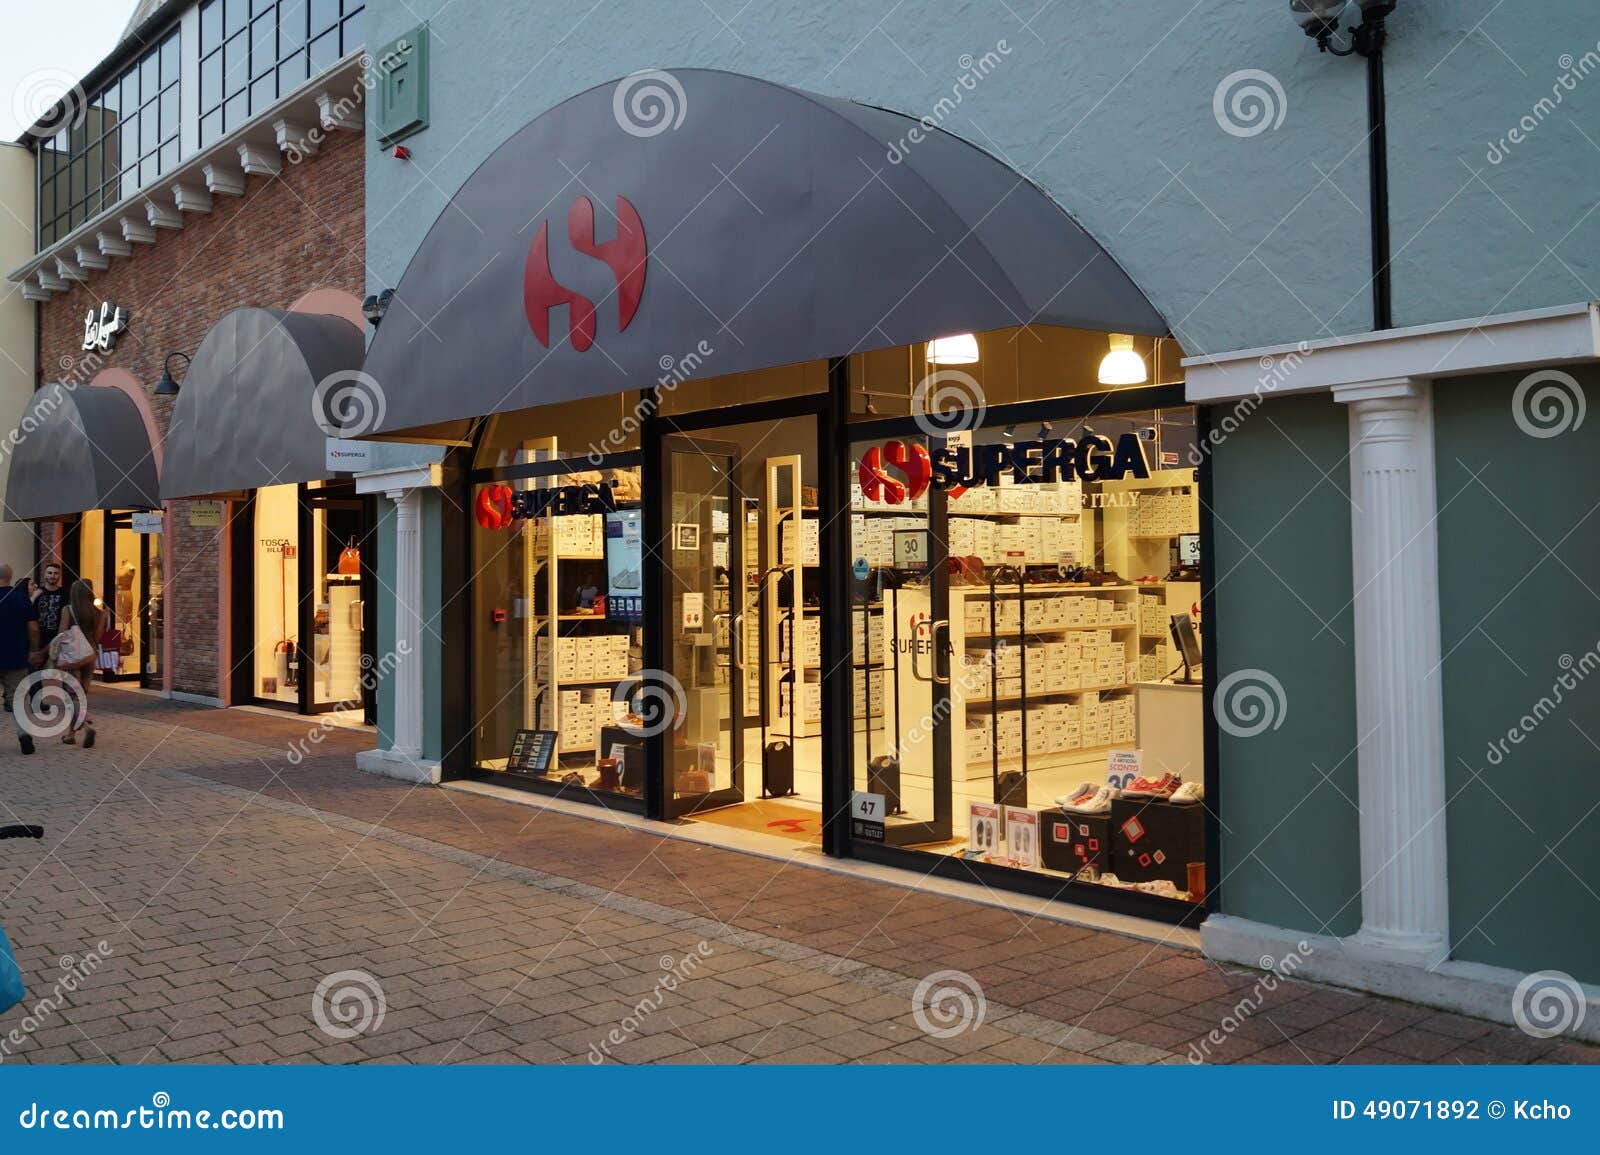 Superga store photography. of business - 49071892